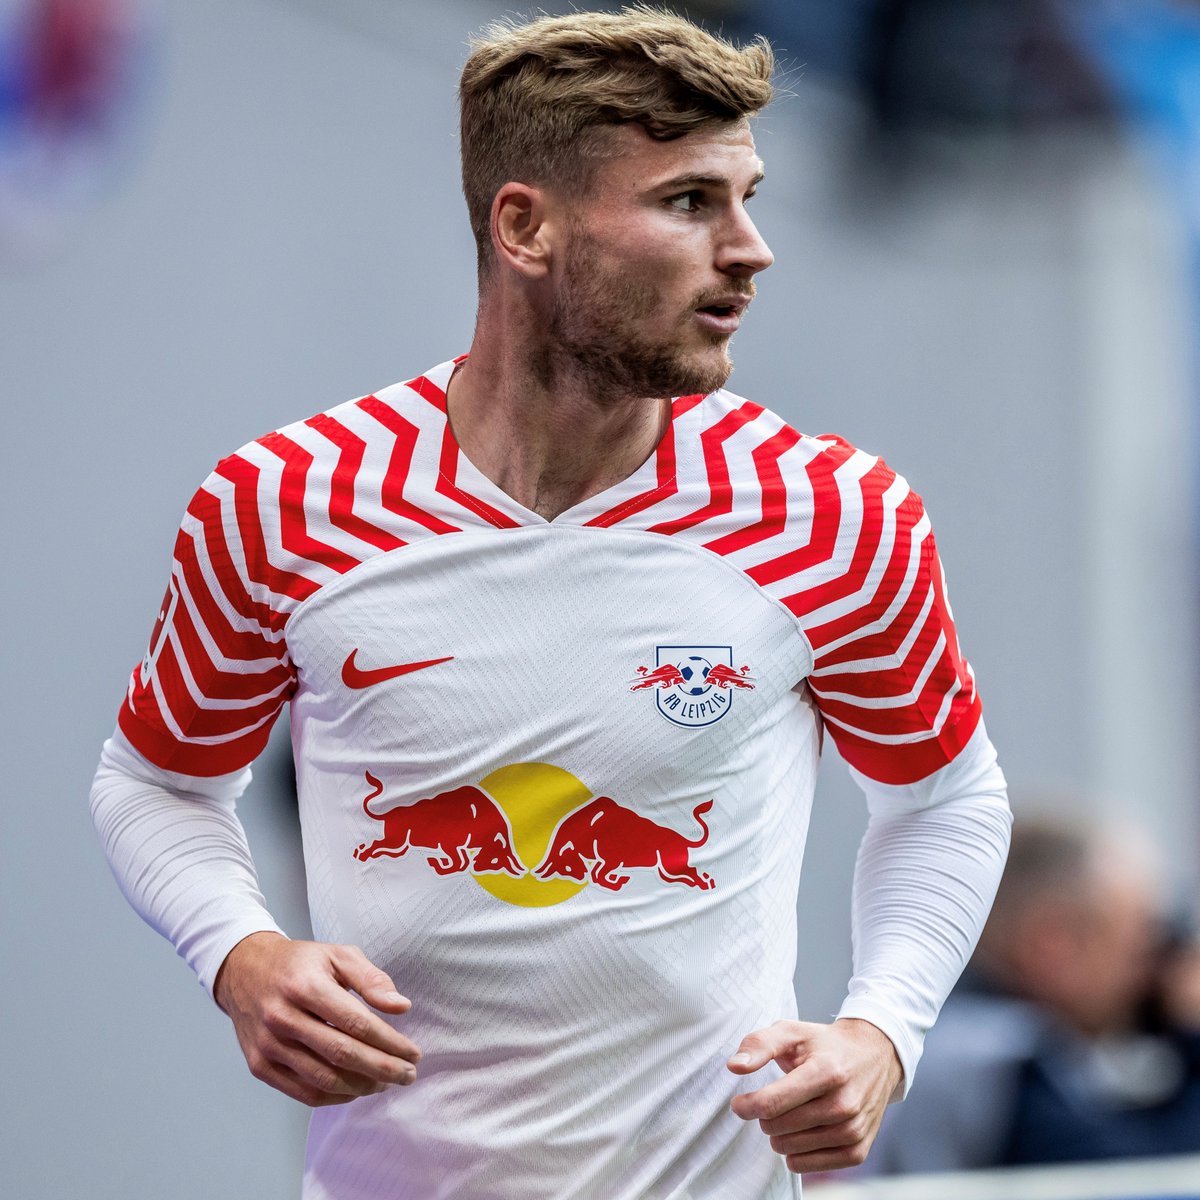 Timo Werner will stay in the @premierleague for another season and will play for @SpursOfficial for the 2024/25 season. Tottenham also has an option to sign the striker permanently in the summer of 2025. Wishing you the best with your continued success in London, @TimoWerner!